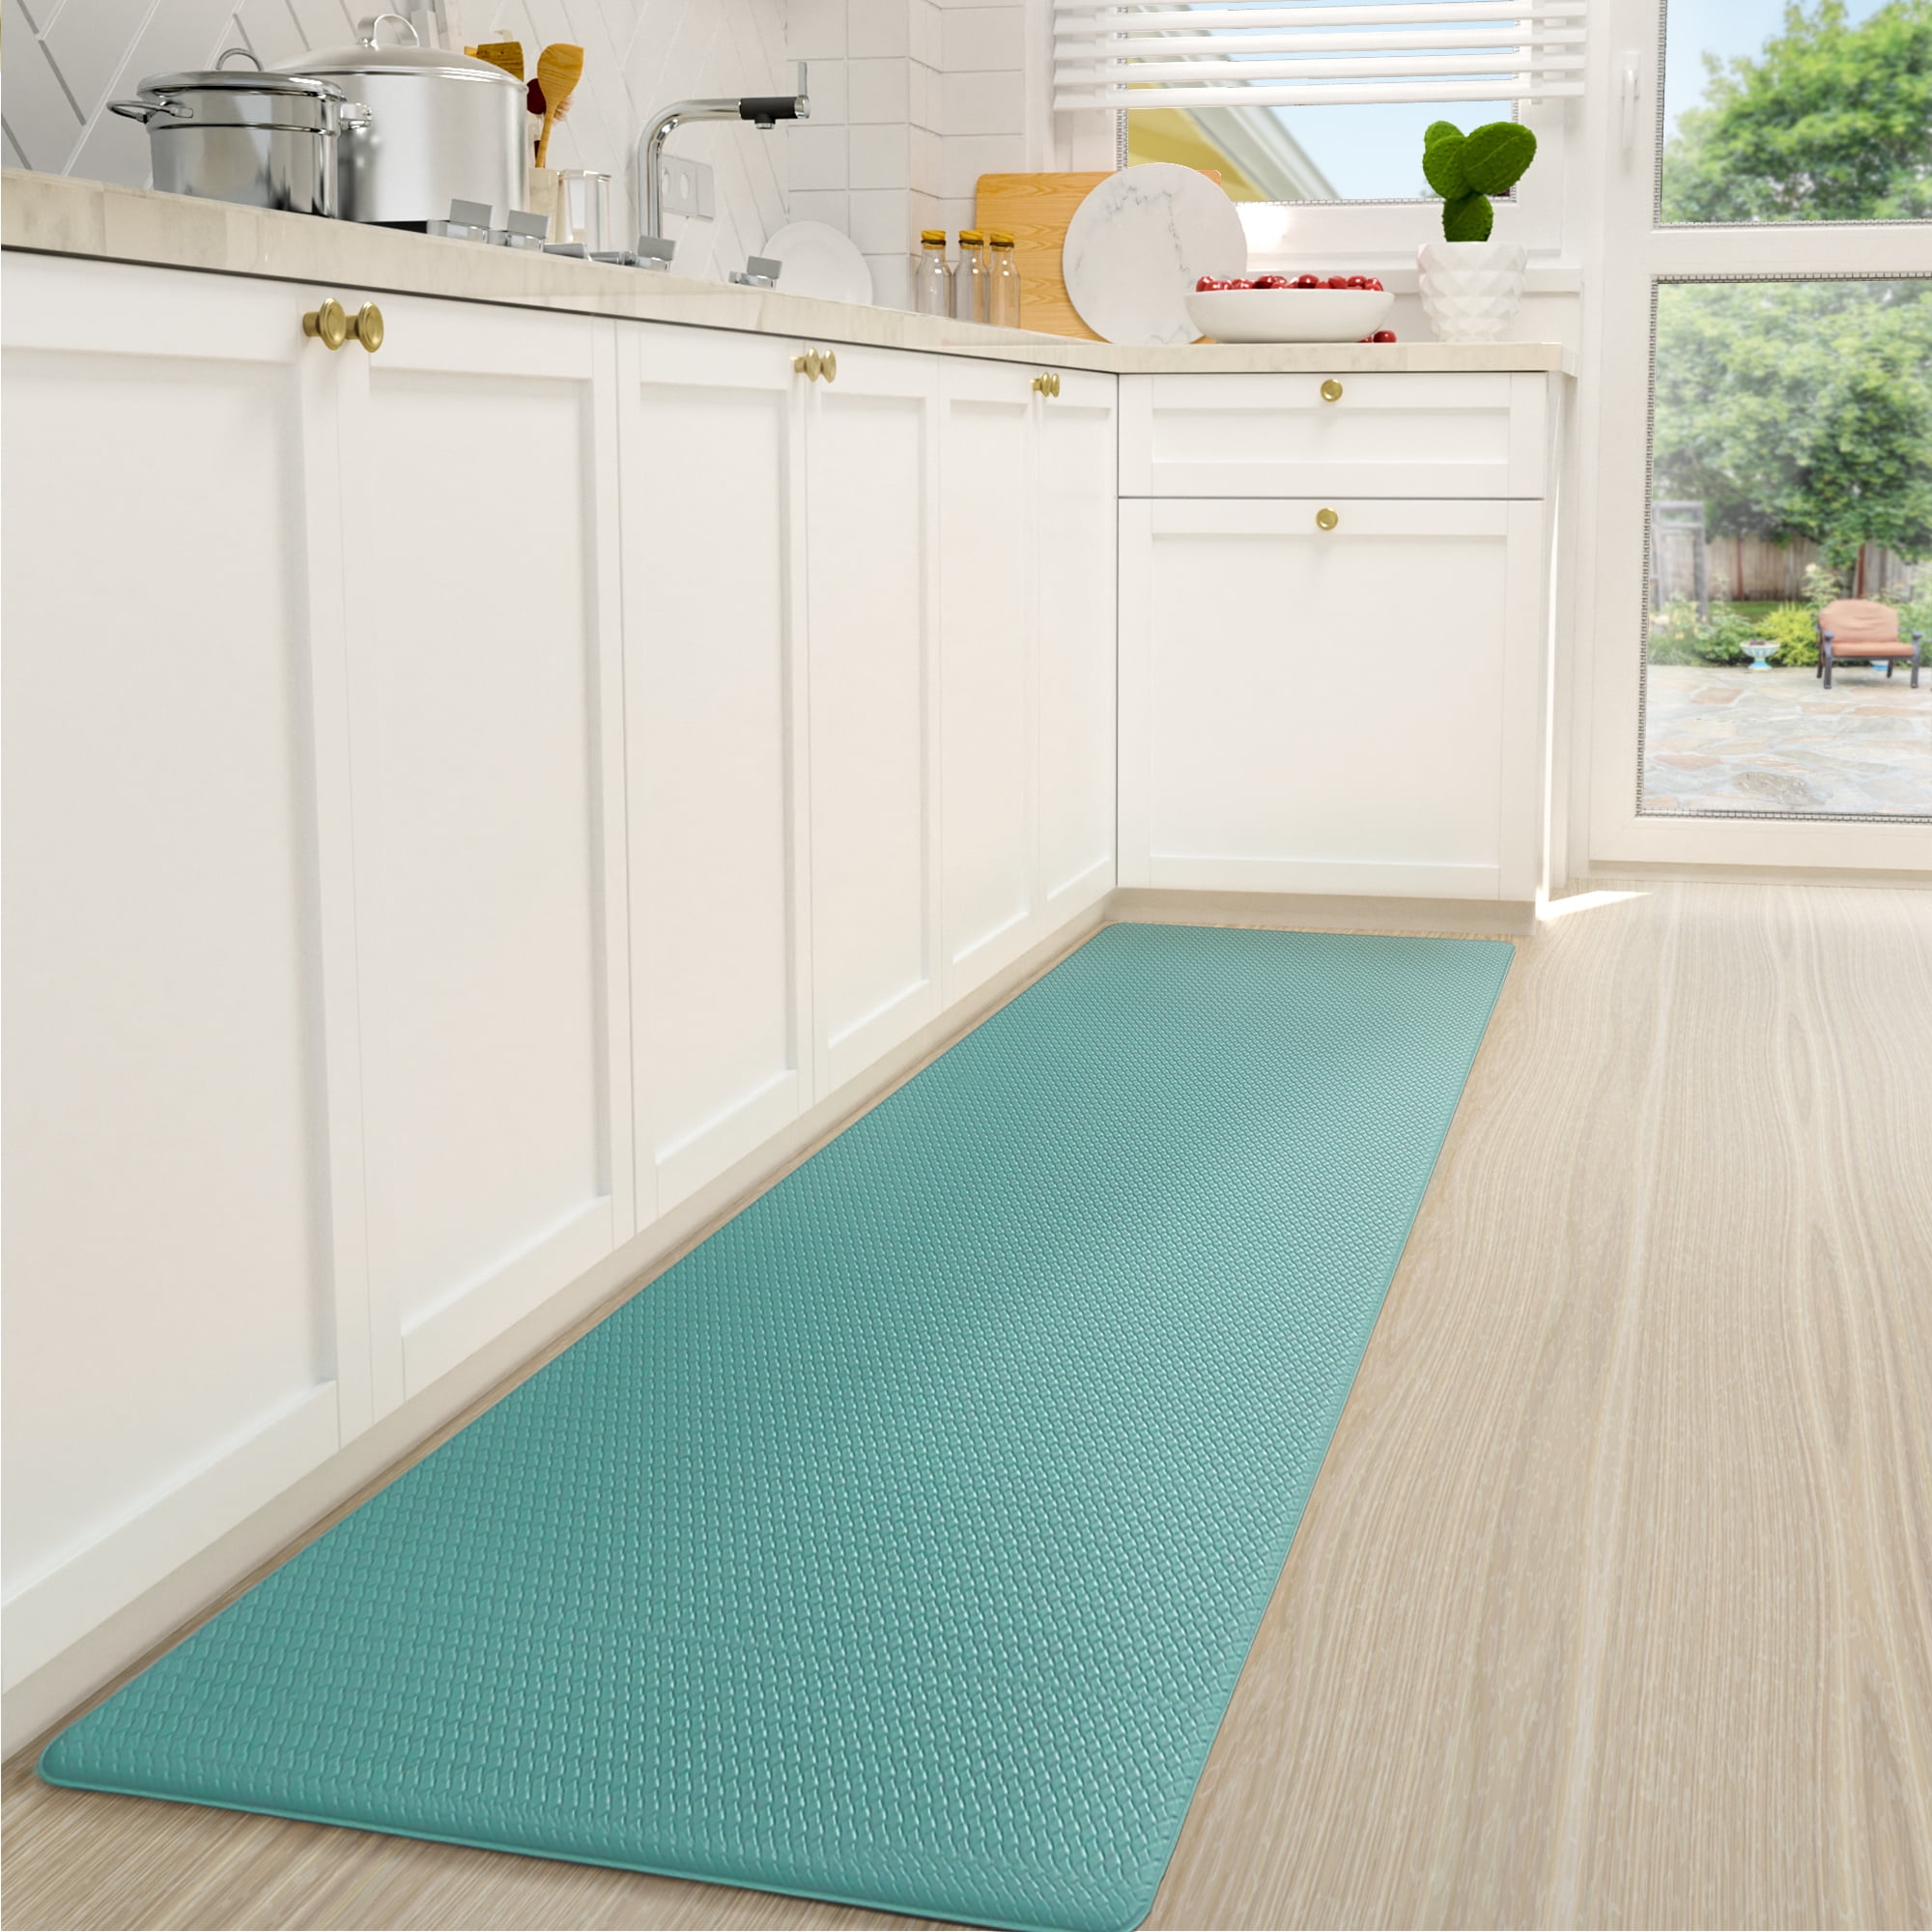  Stitch Carpet, Rug, Rug, For Summer, Floor Heating  Compatible, OFOK Washable, Anti-Slip, Anti-Mite, Antibacterial, Odor  Resistant, Soft Touch, Stylish, Gentle Flannel Rug, Character (39.4 x 59.1  inches (100 x 150 cm) 